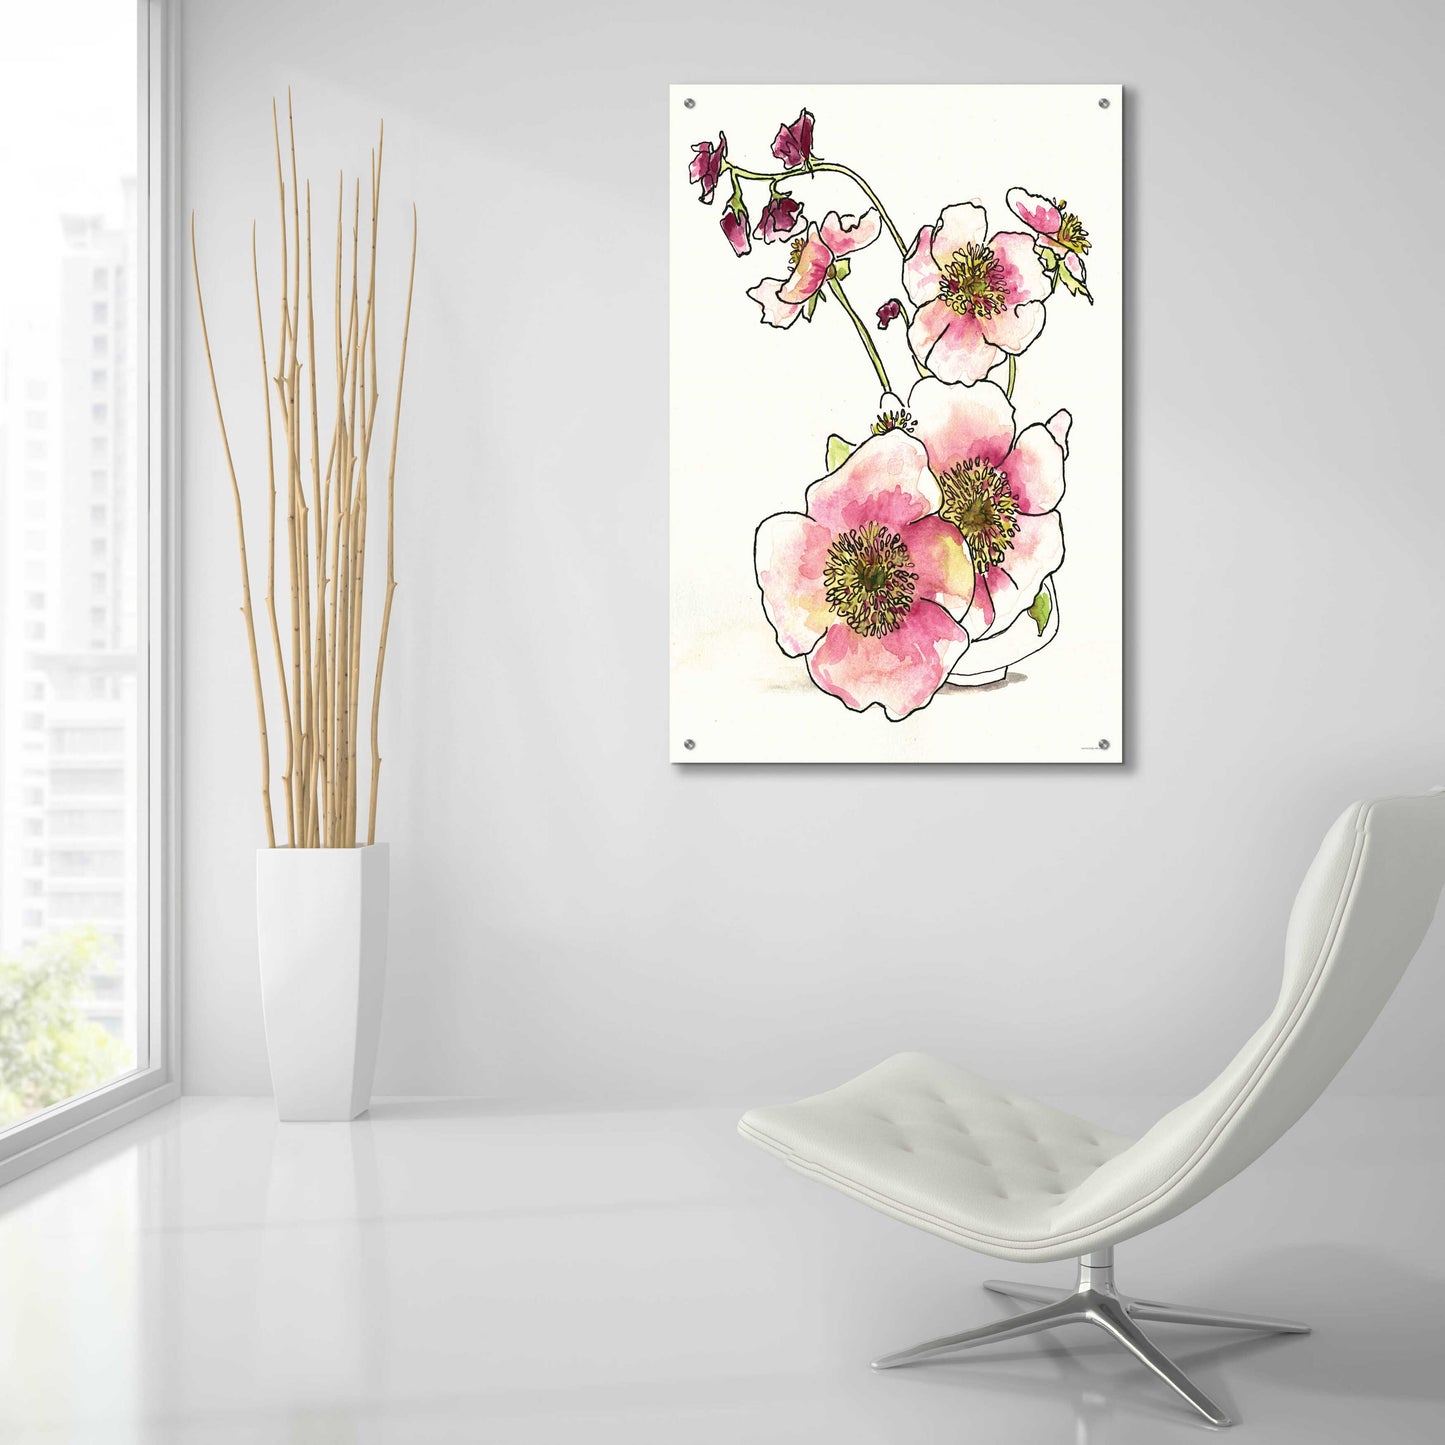 Epic Art 'Sweetness in a Small Vase' by Kamdon Kreations, Acrylic Glass Wall Art,24x36